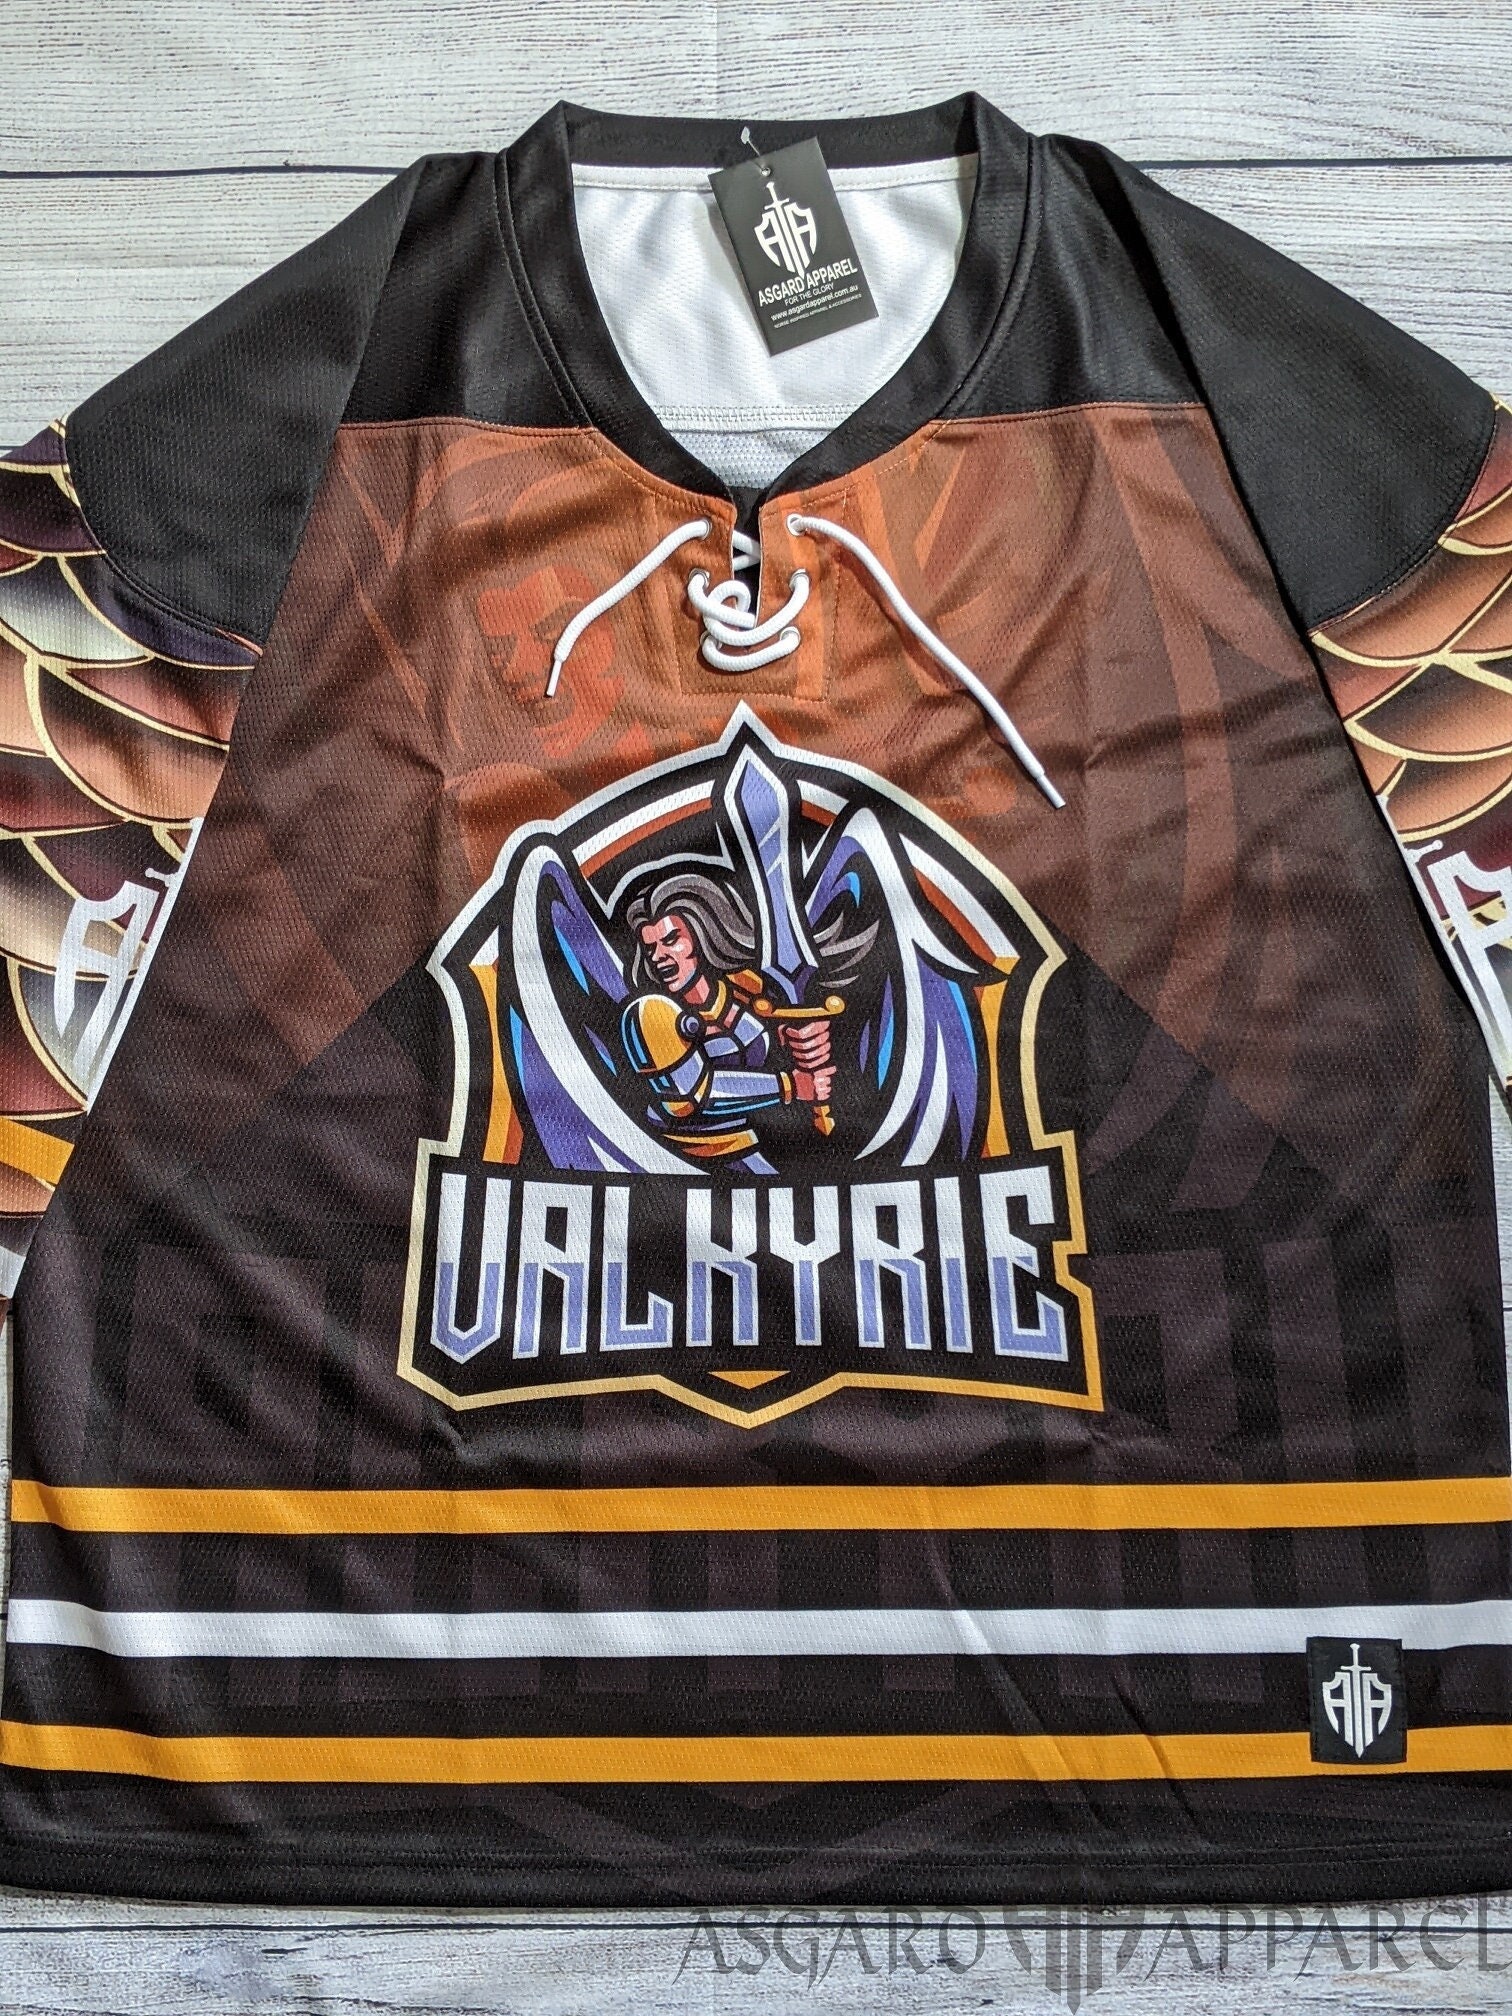 20-something years ago, I was quite the Coyotes fan. Still love these  jerseys. : r/hockeyjerseys